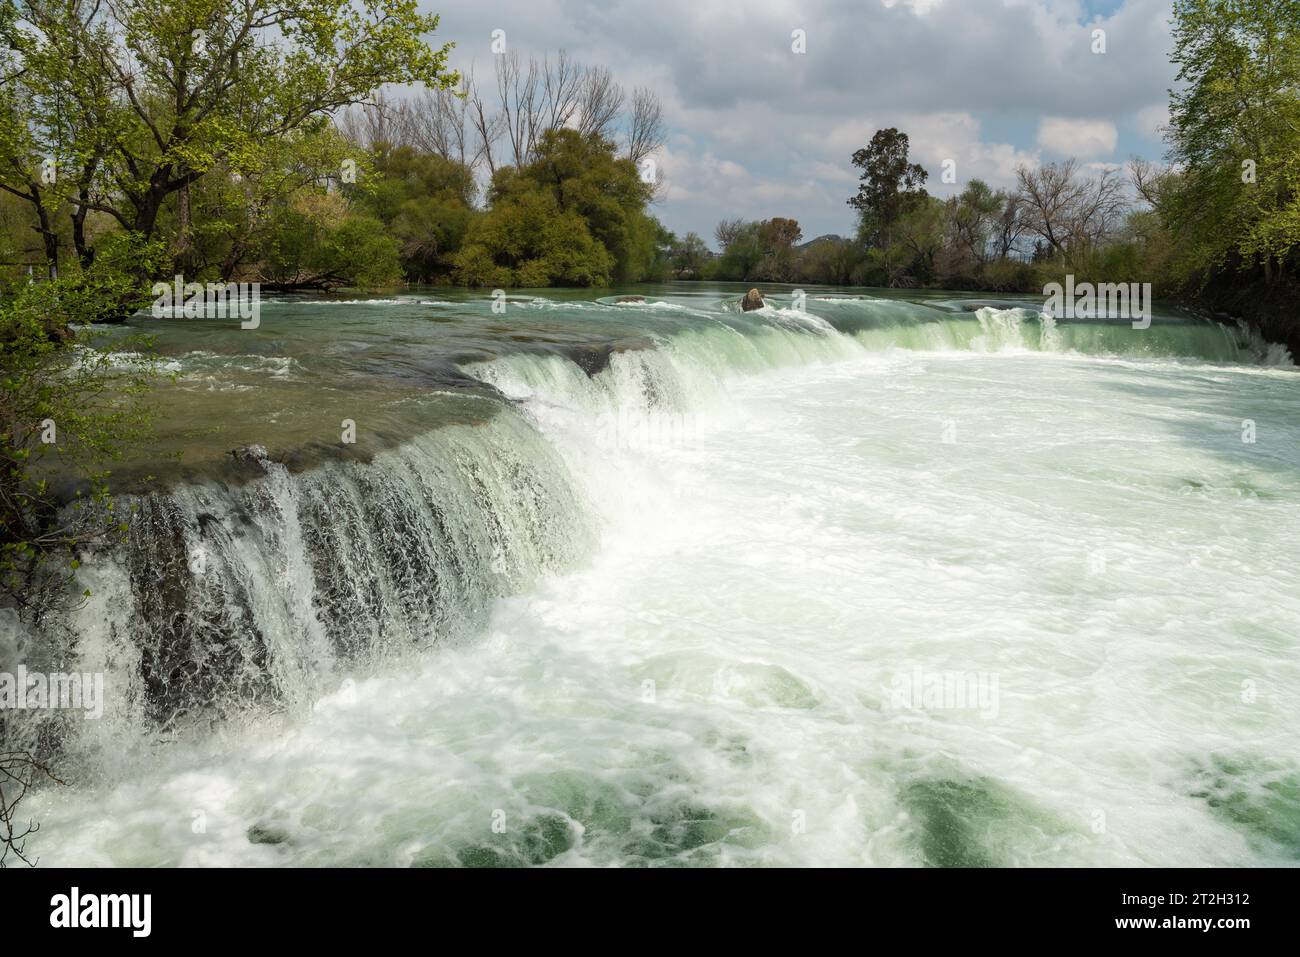 Manavgat Waterfall in Manavgat, Antalya province, Turkey. View of the white, foaming water of the Manavgat Waterfalls flowing powerfully over the rock Stock Photo